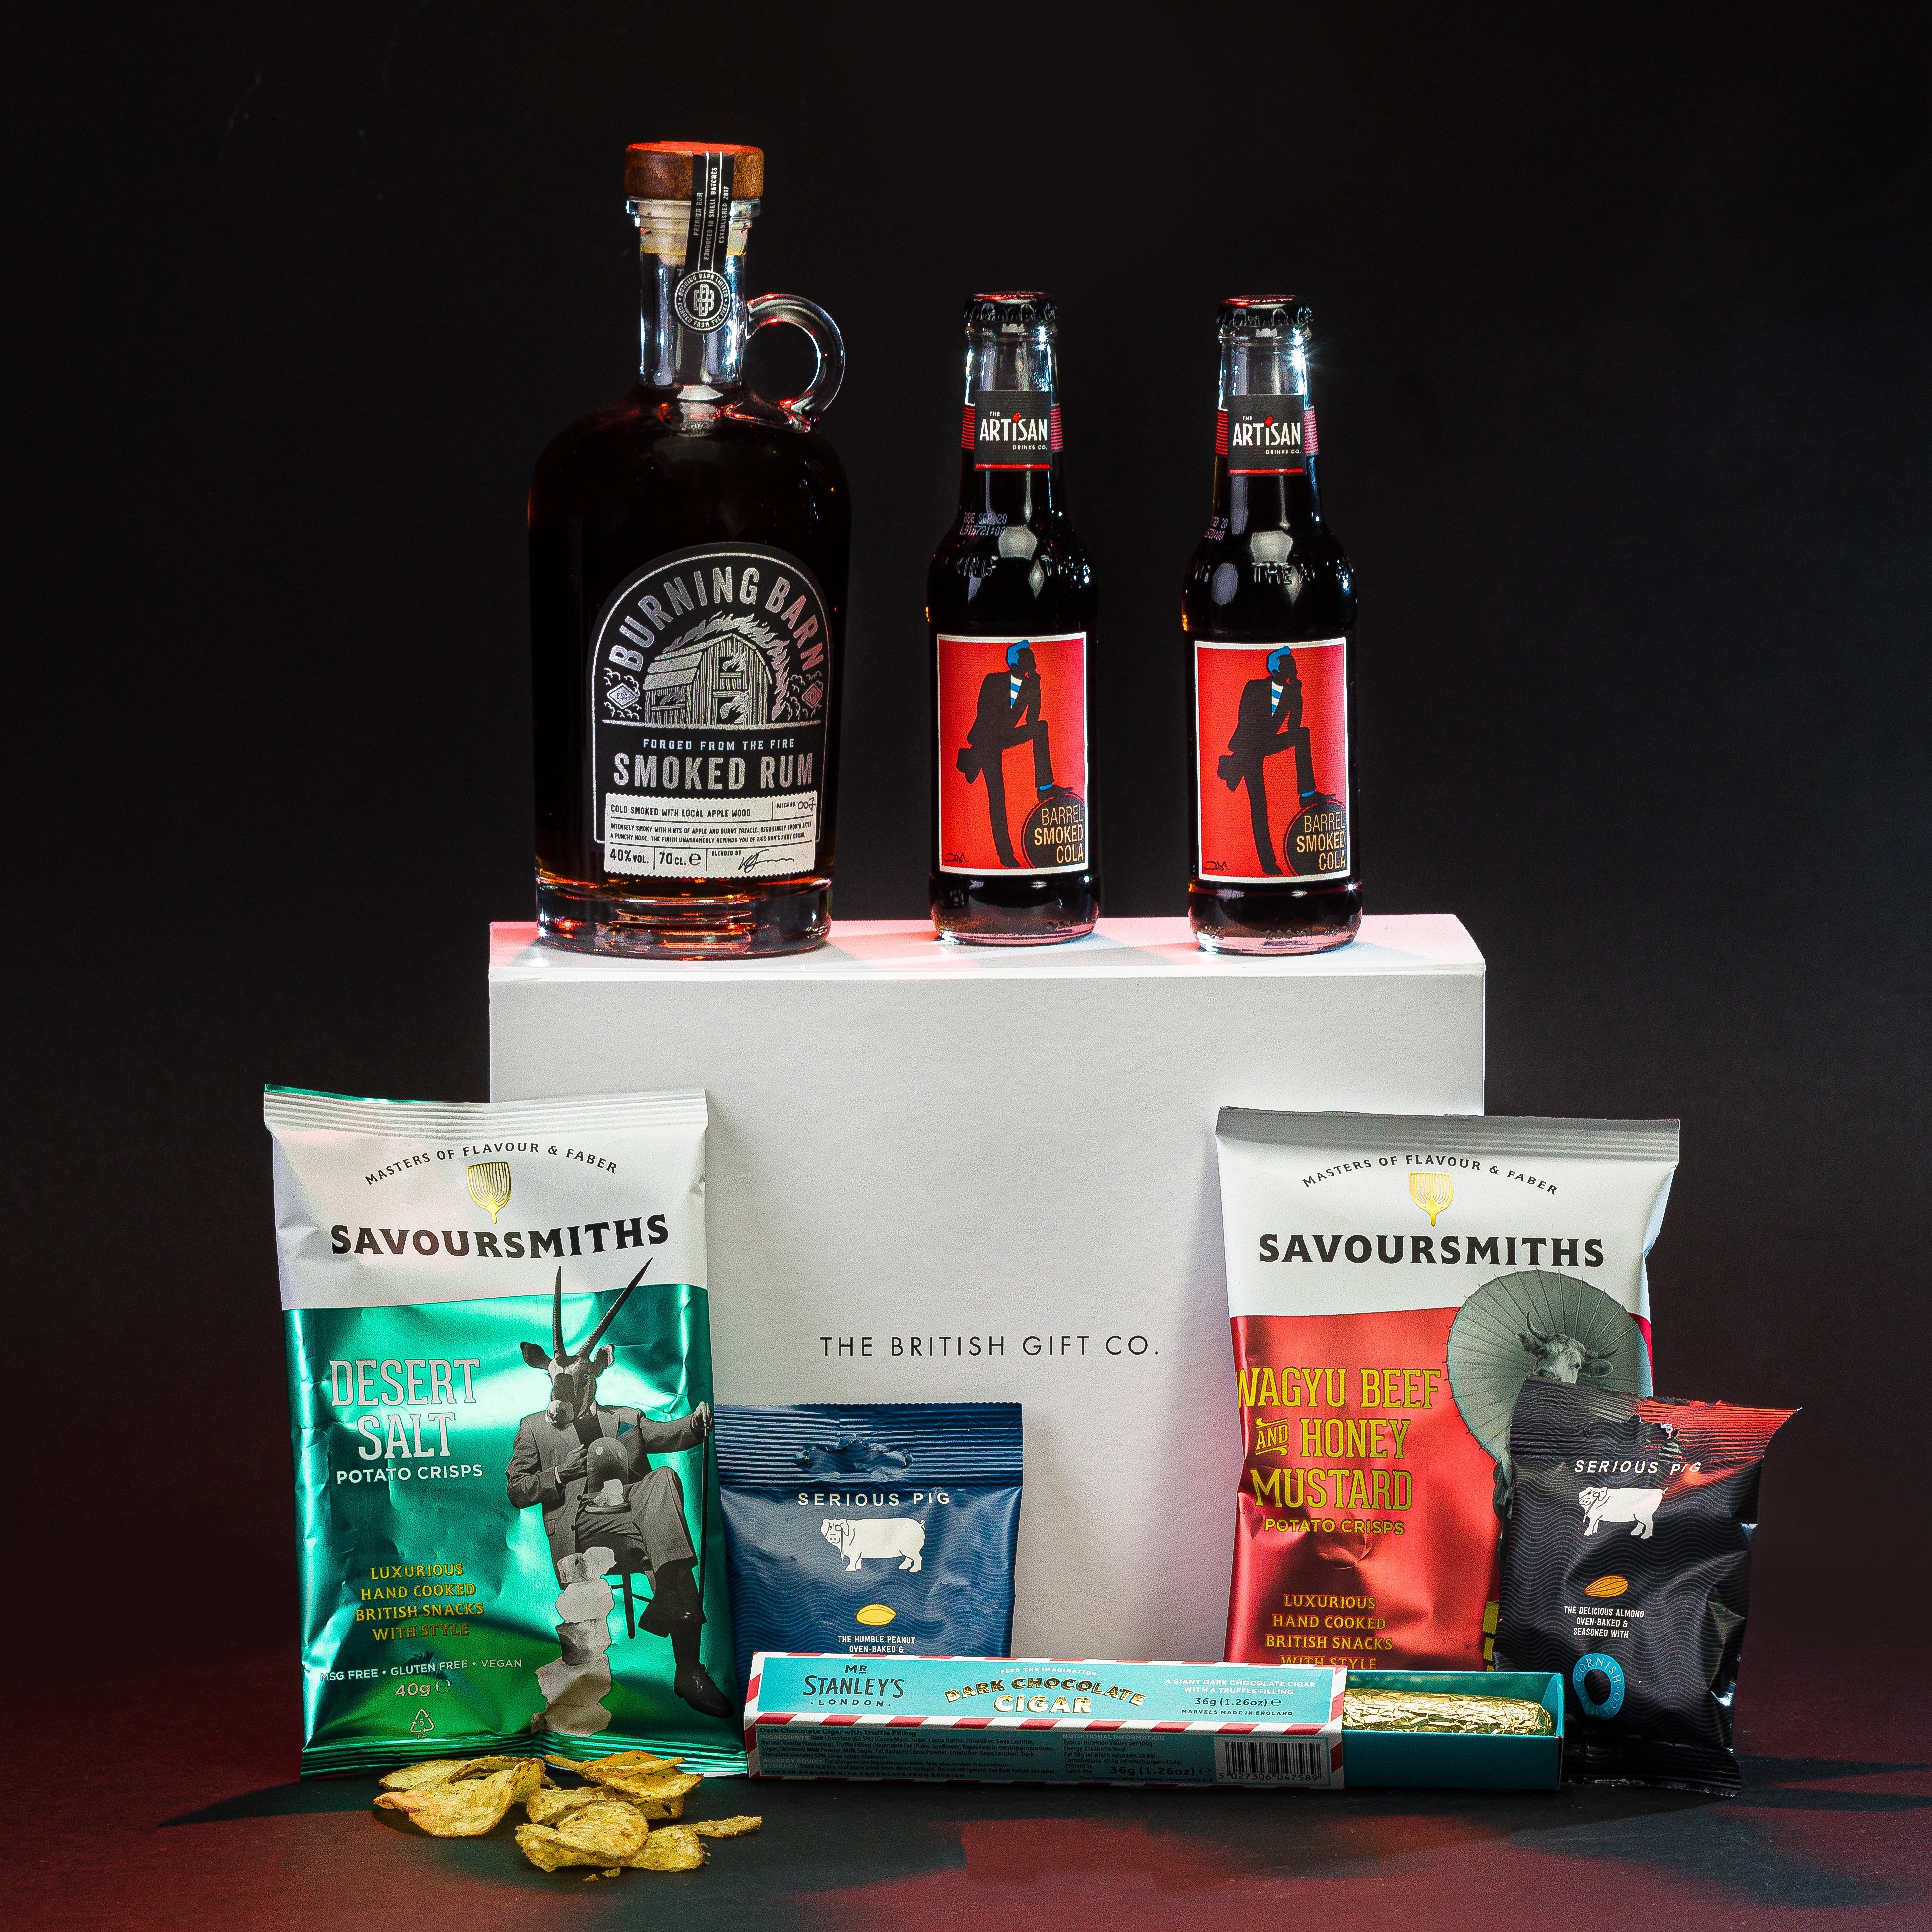 Rum Gift Set with Bar Snacks | Burning Barn Rum, Cola, Crisps & Nuts – The British Gift Co.